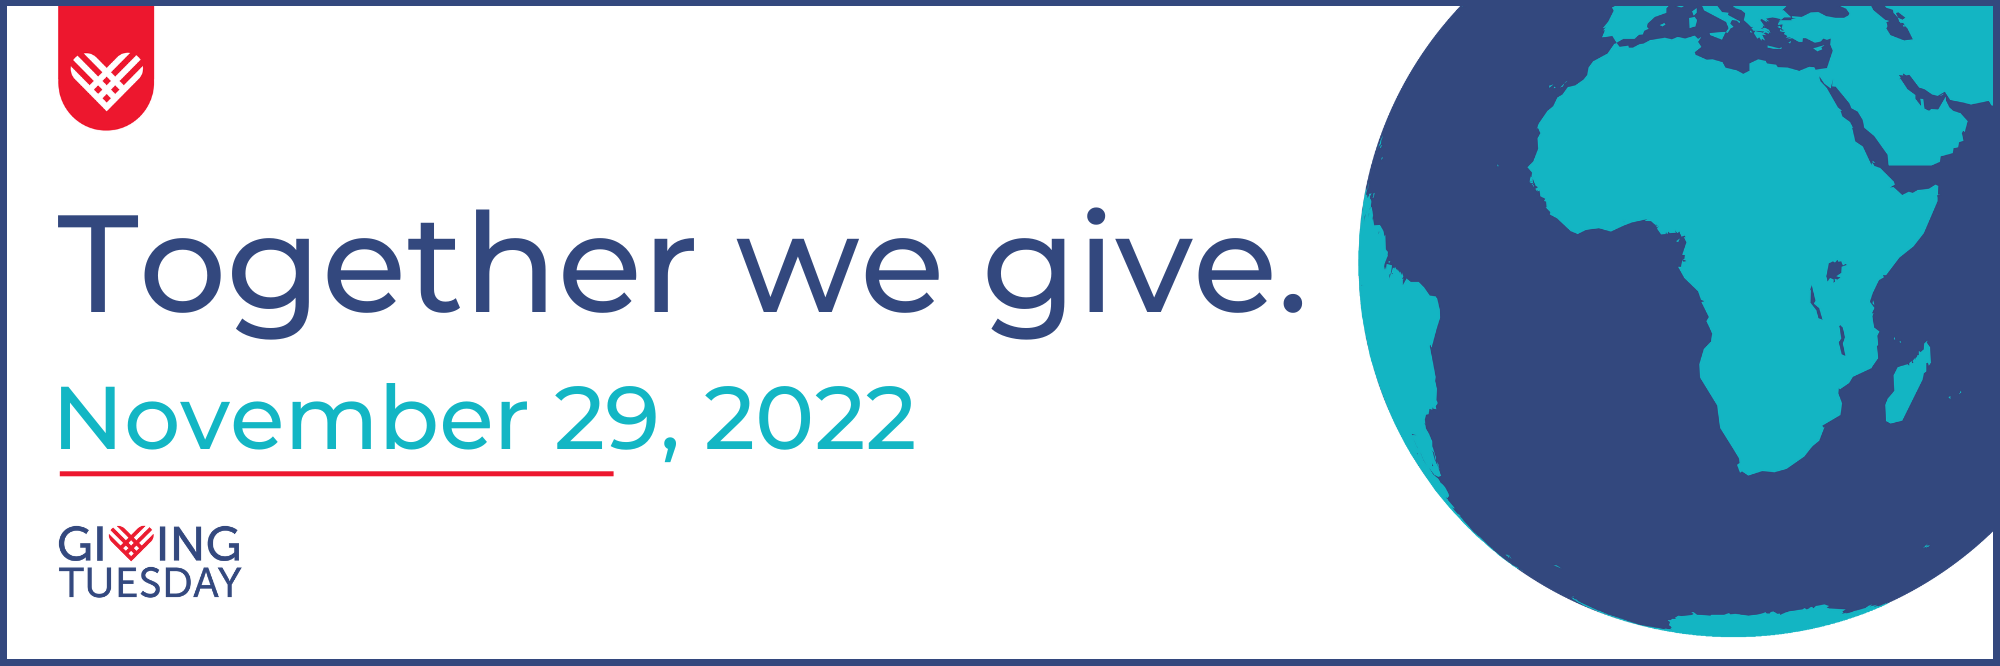 givingtuesday 2022 twitter banners